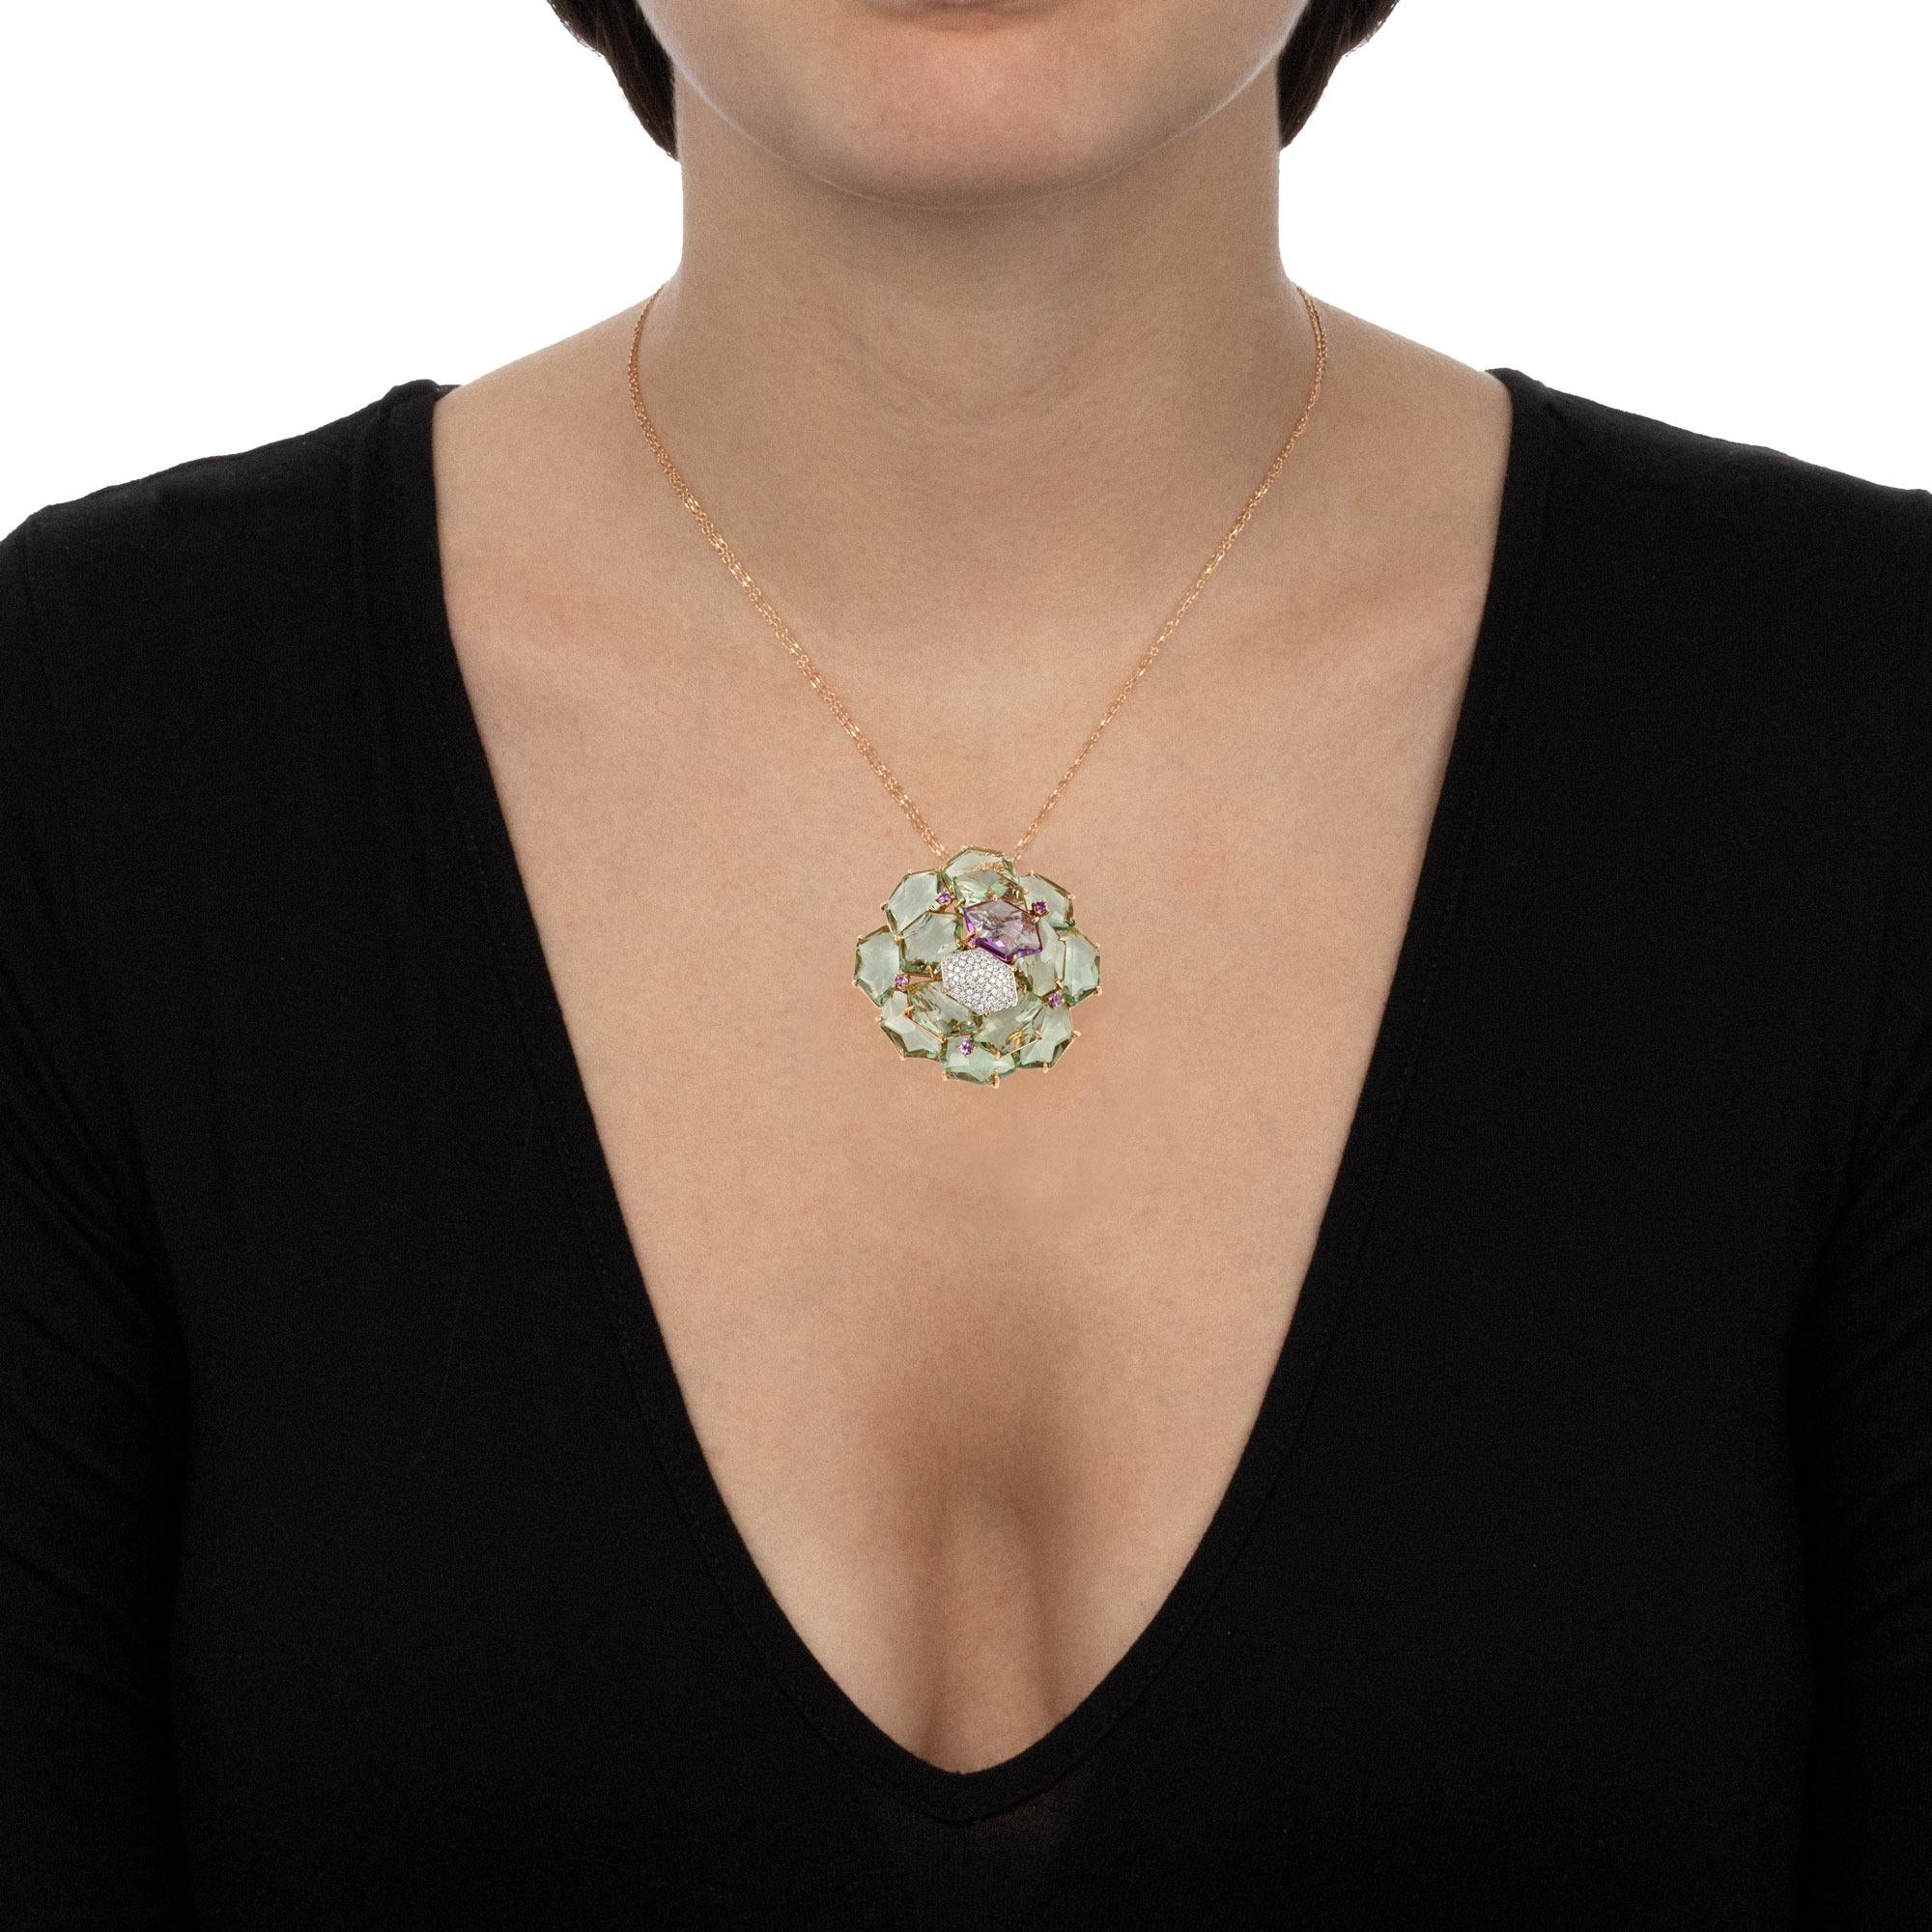 A handmade contemporary jewellery piece with a modern design that is bold and sophisticated at the same time. The distinctive asymmetrical setting of the pendant lets the gemstones sparkle bright, drawing the light around your neckline with the warm